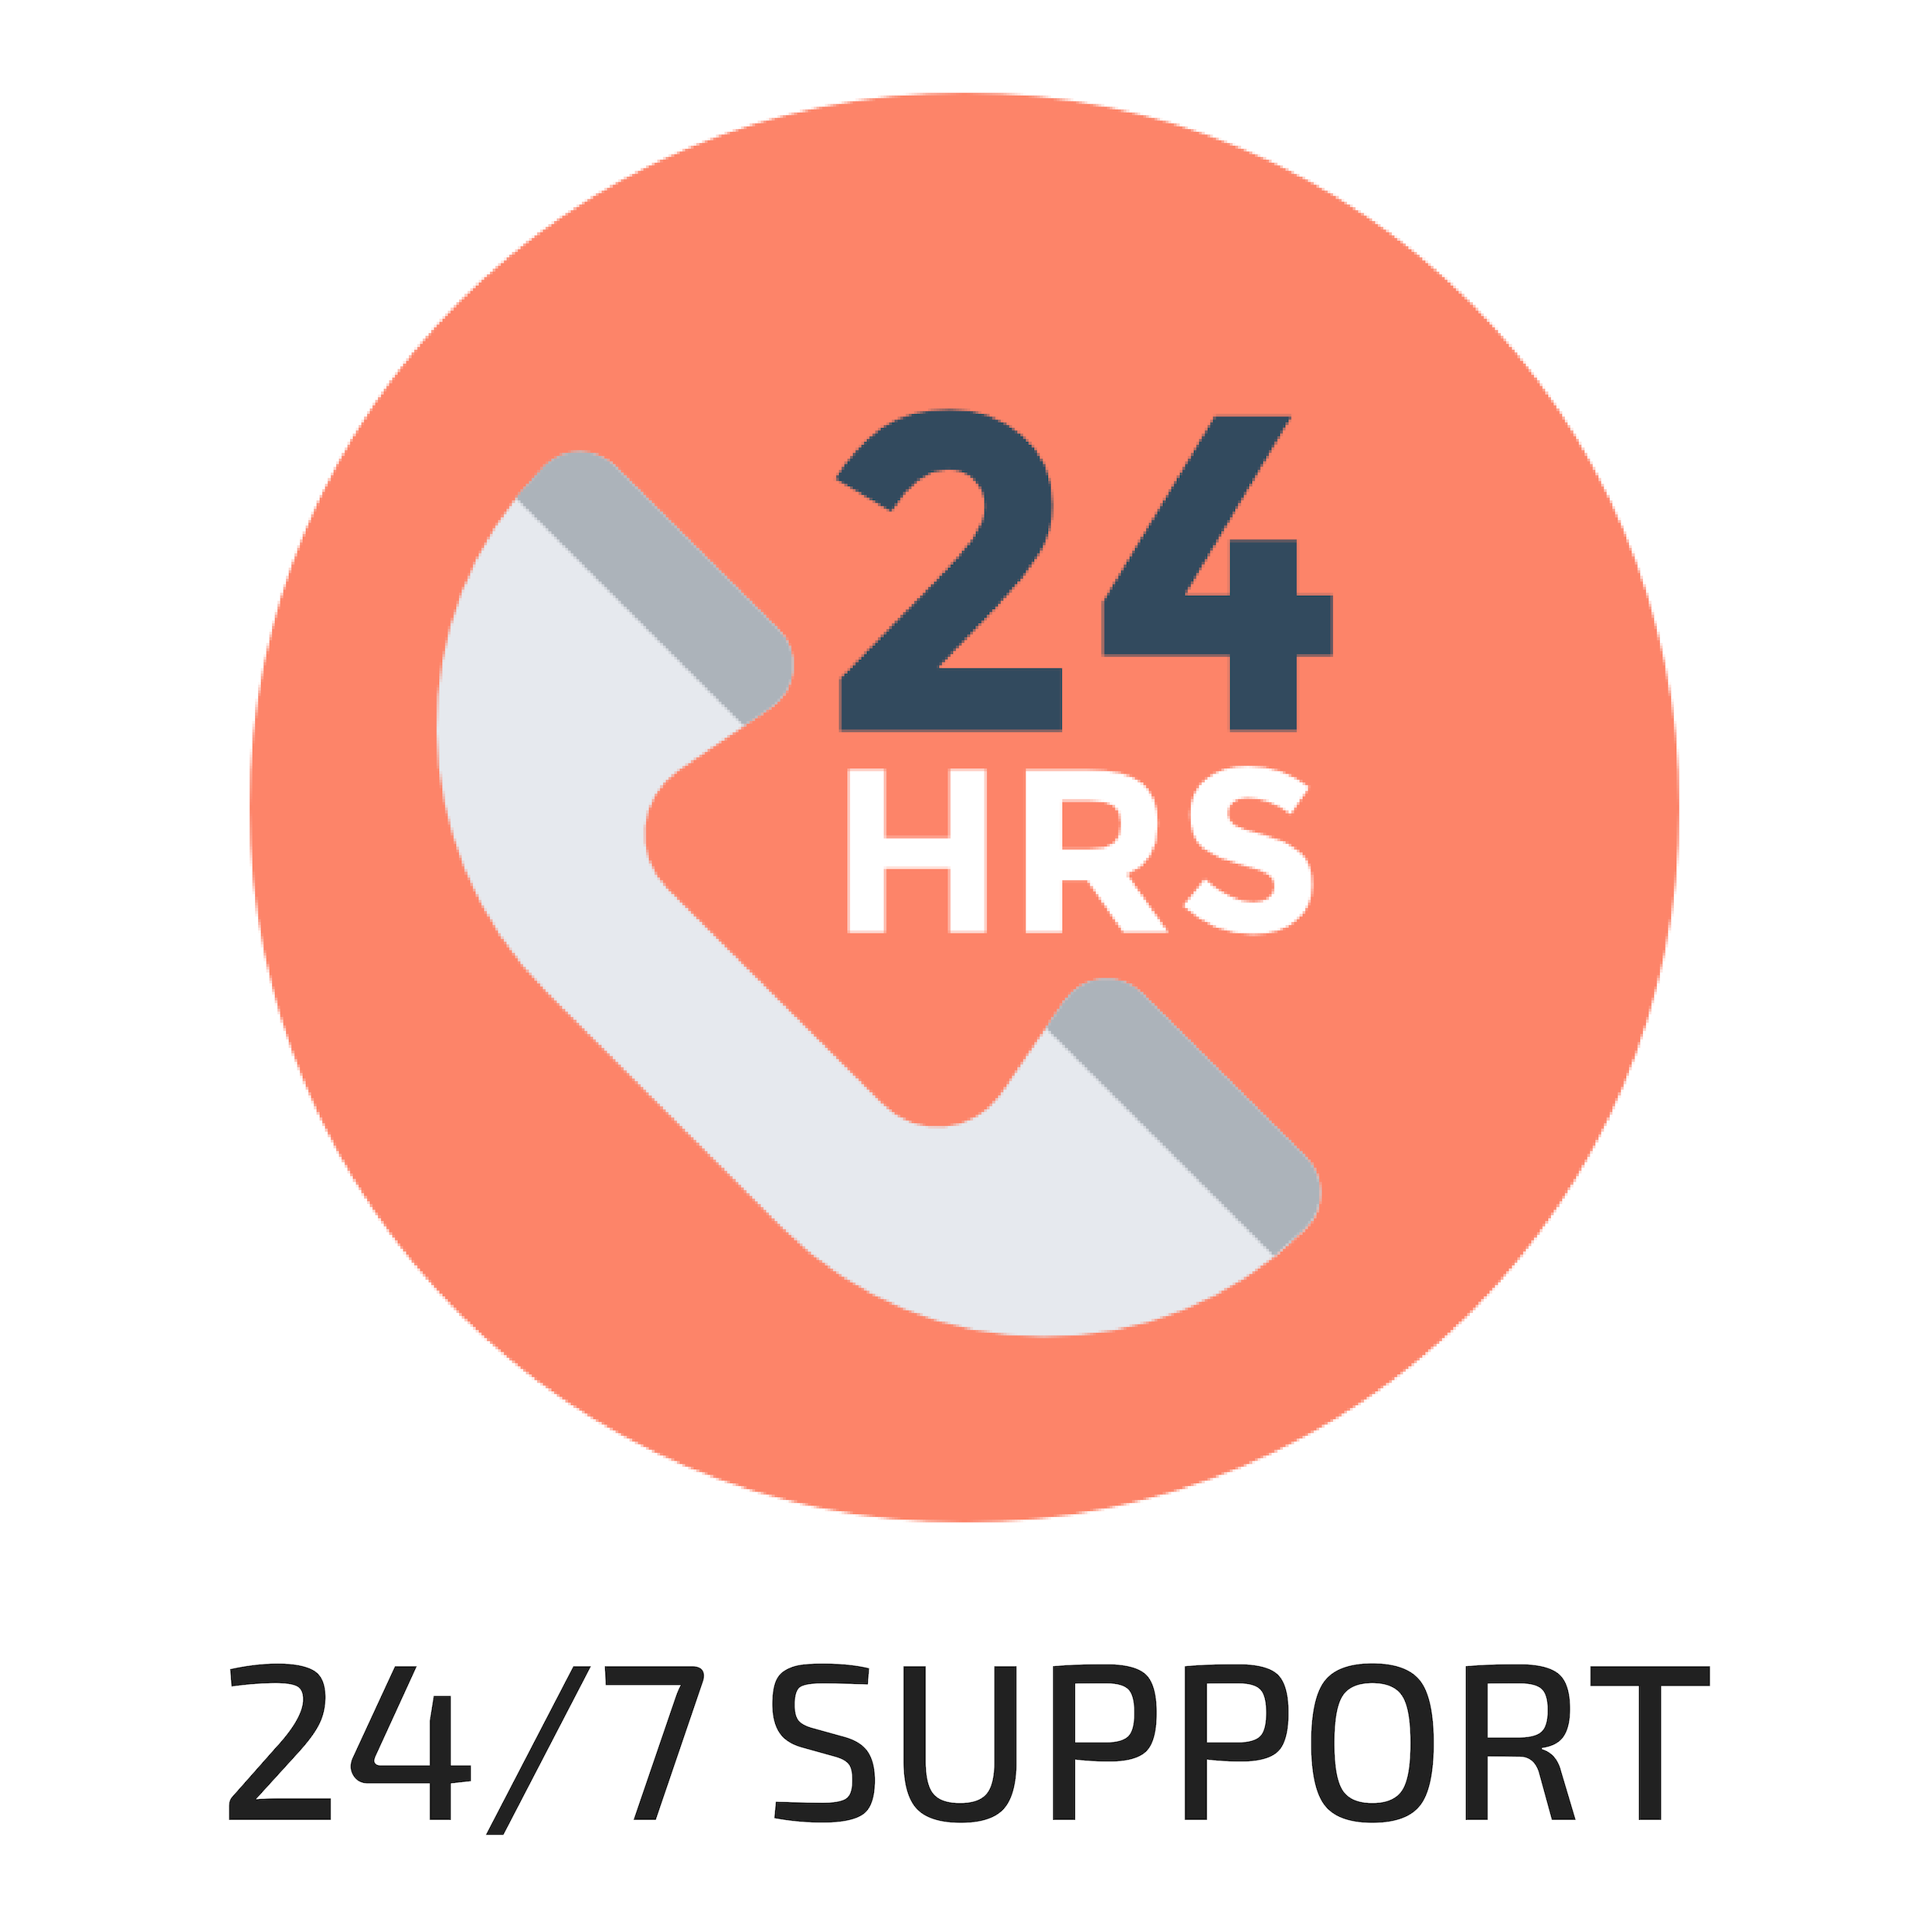 NM 24 biz support.png